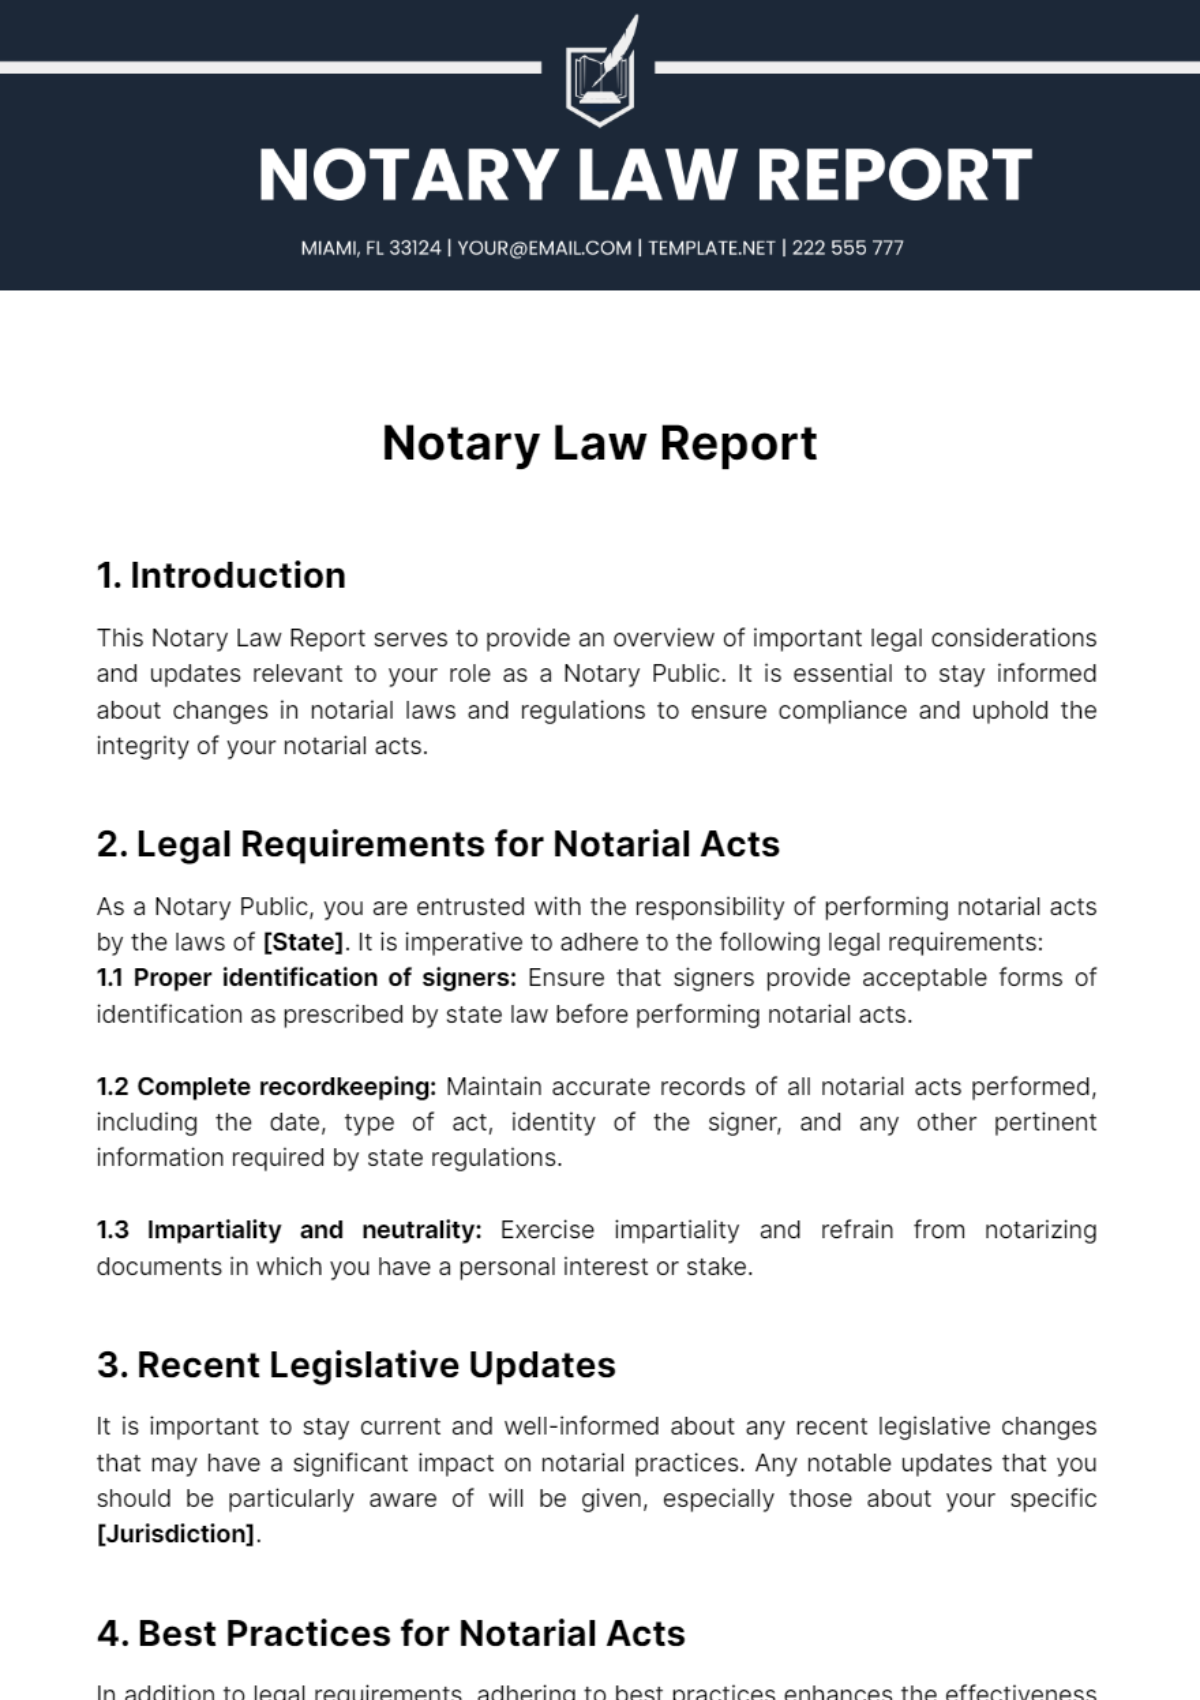 Free Notary Law Report Template